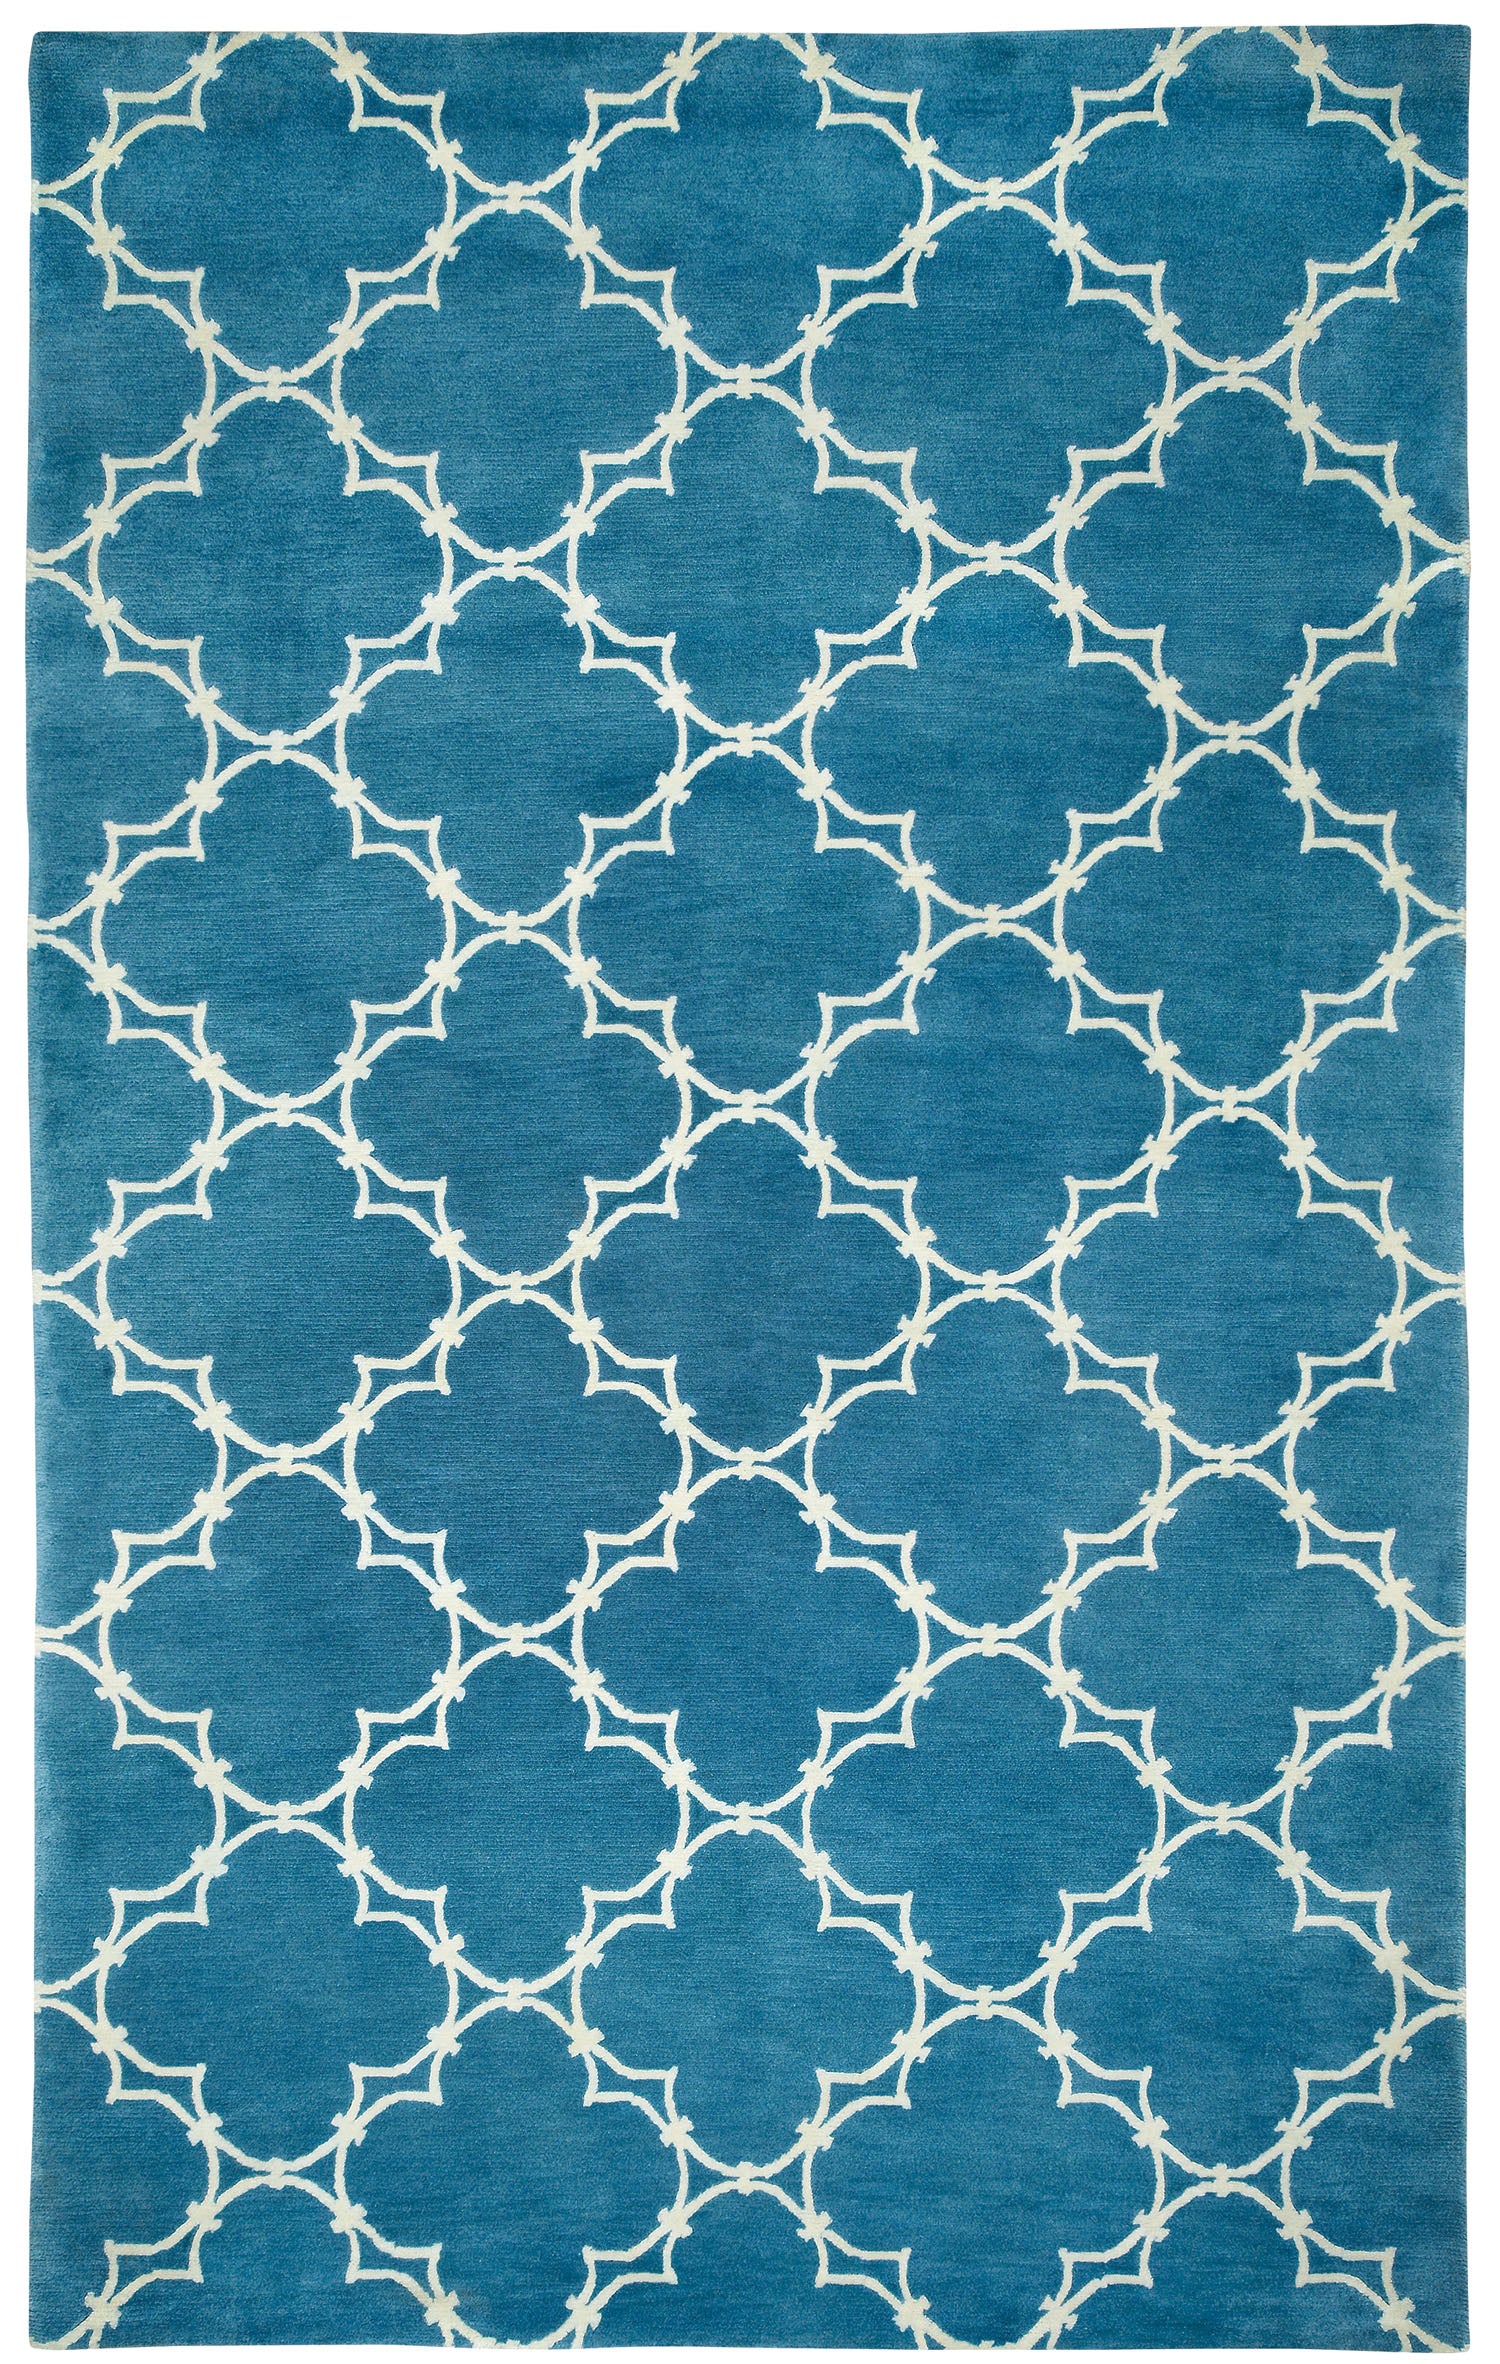 COCOCOZY Yale Bright Blue Wool Rug 5ft x 8ft